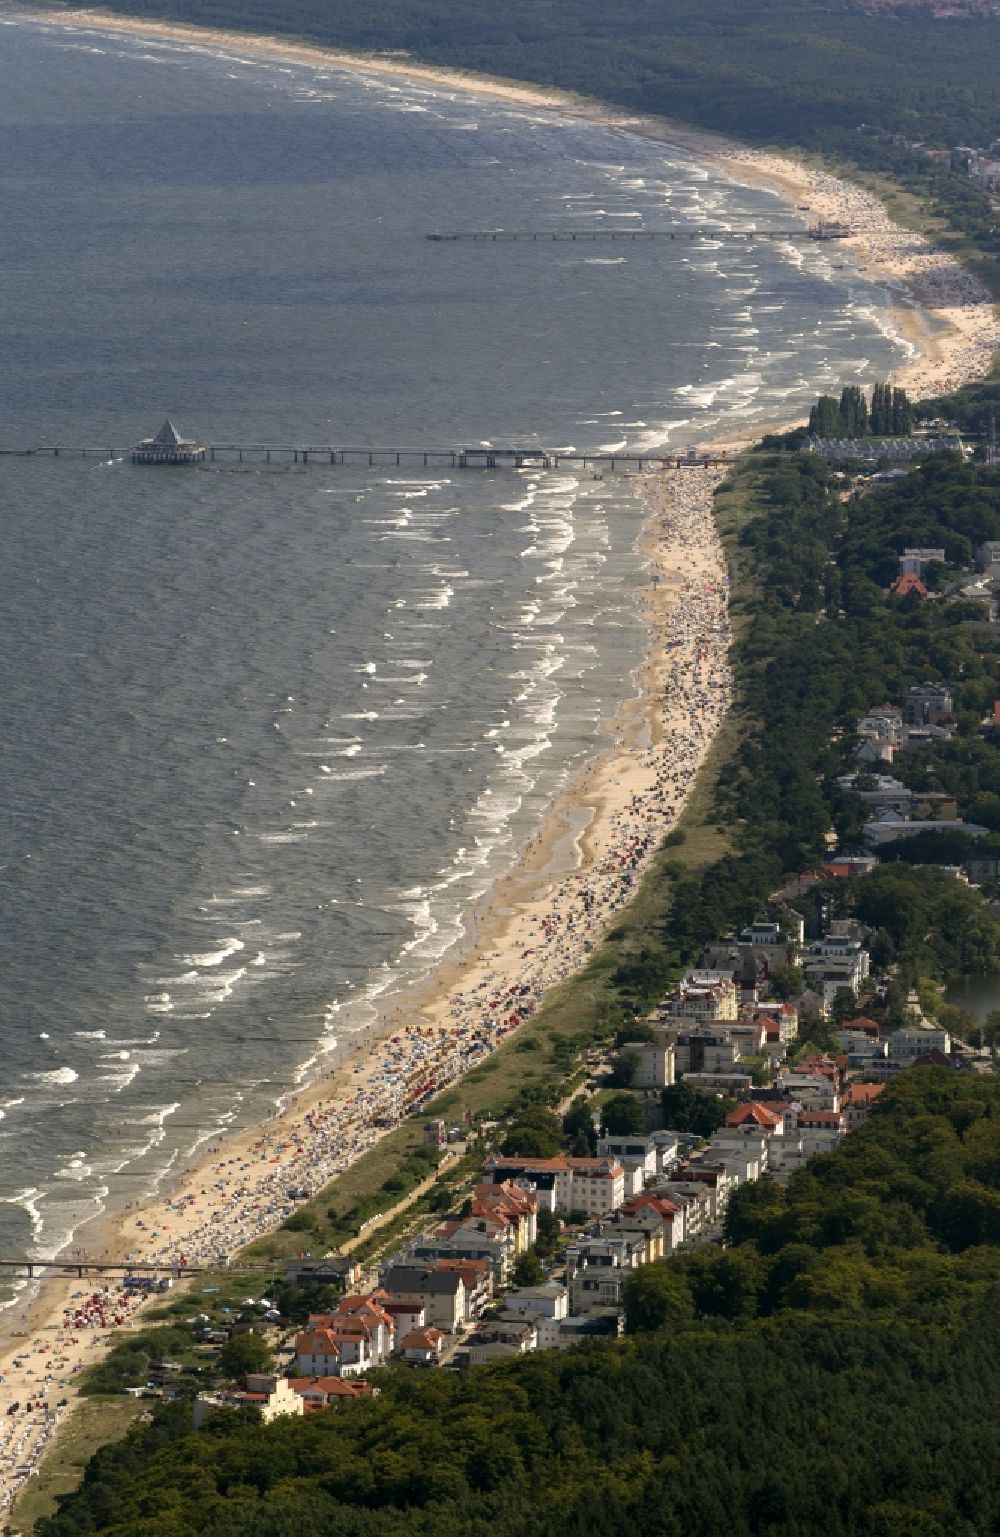 Bansin from above - View of the coastal area of Bansin, a popular tourist and resort on the Baltic Sea coast of the island of Usedom in Mecklenburg-Western Pomerania